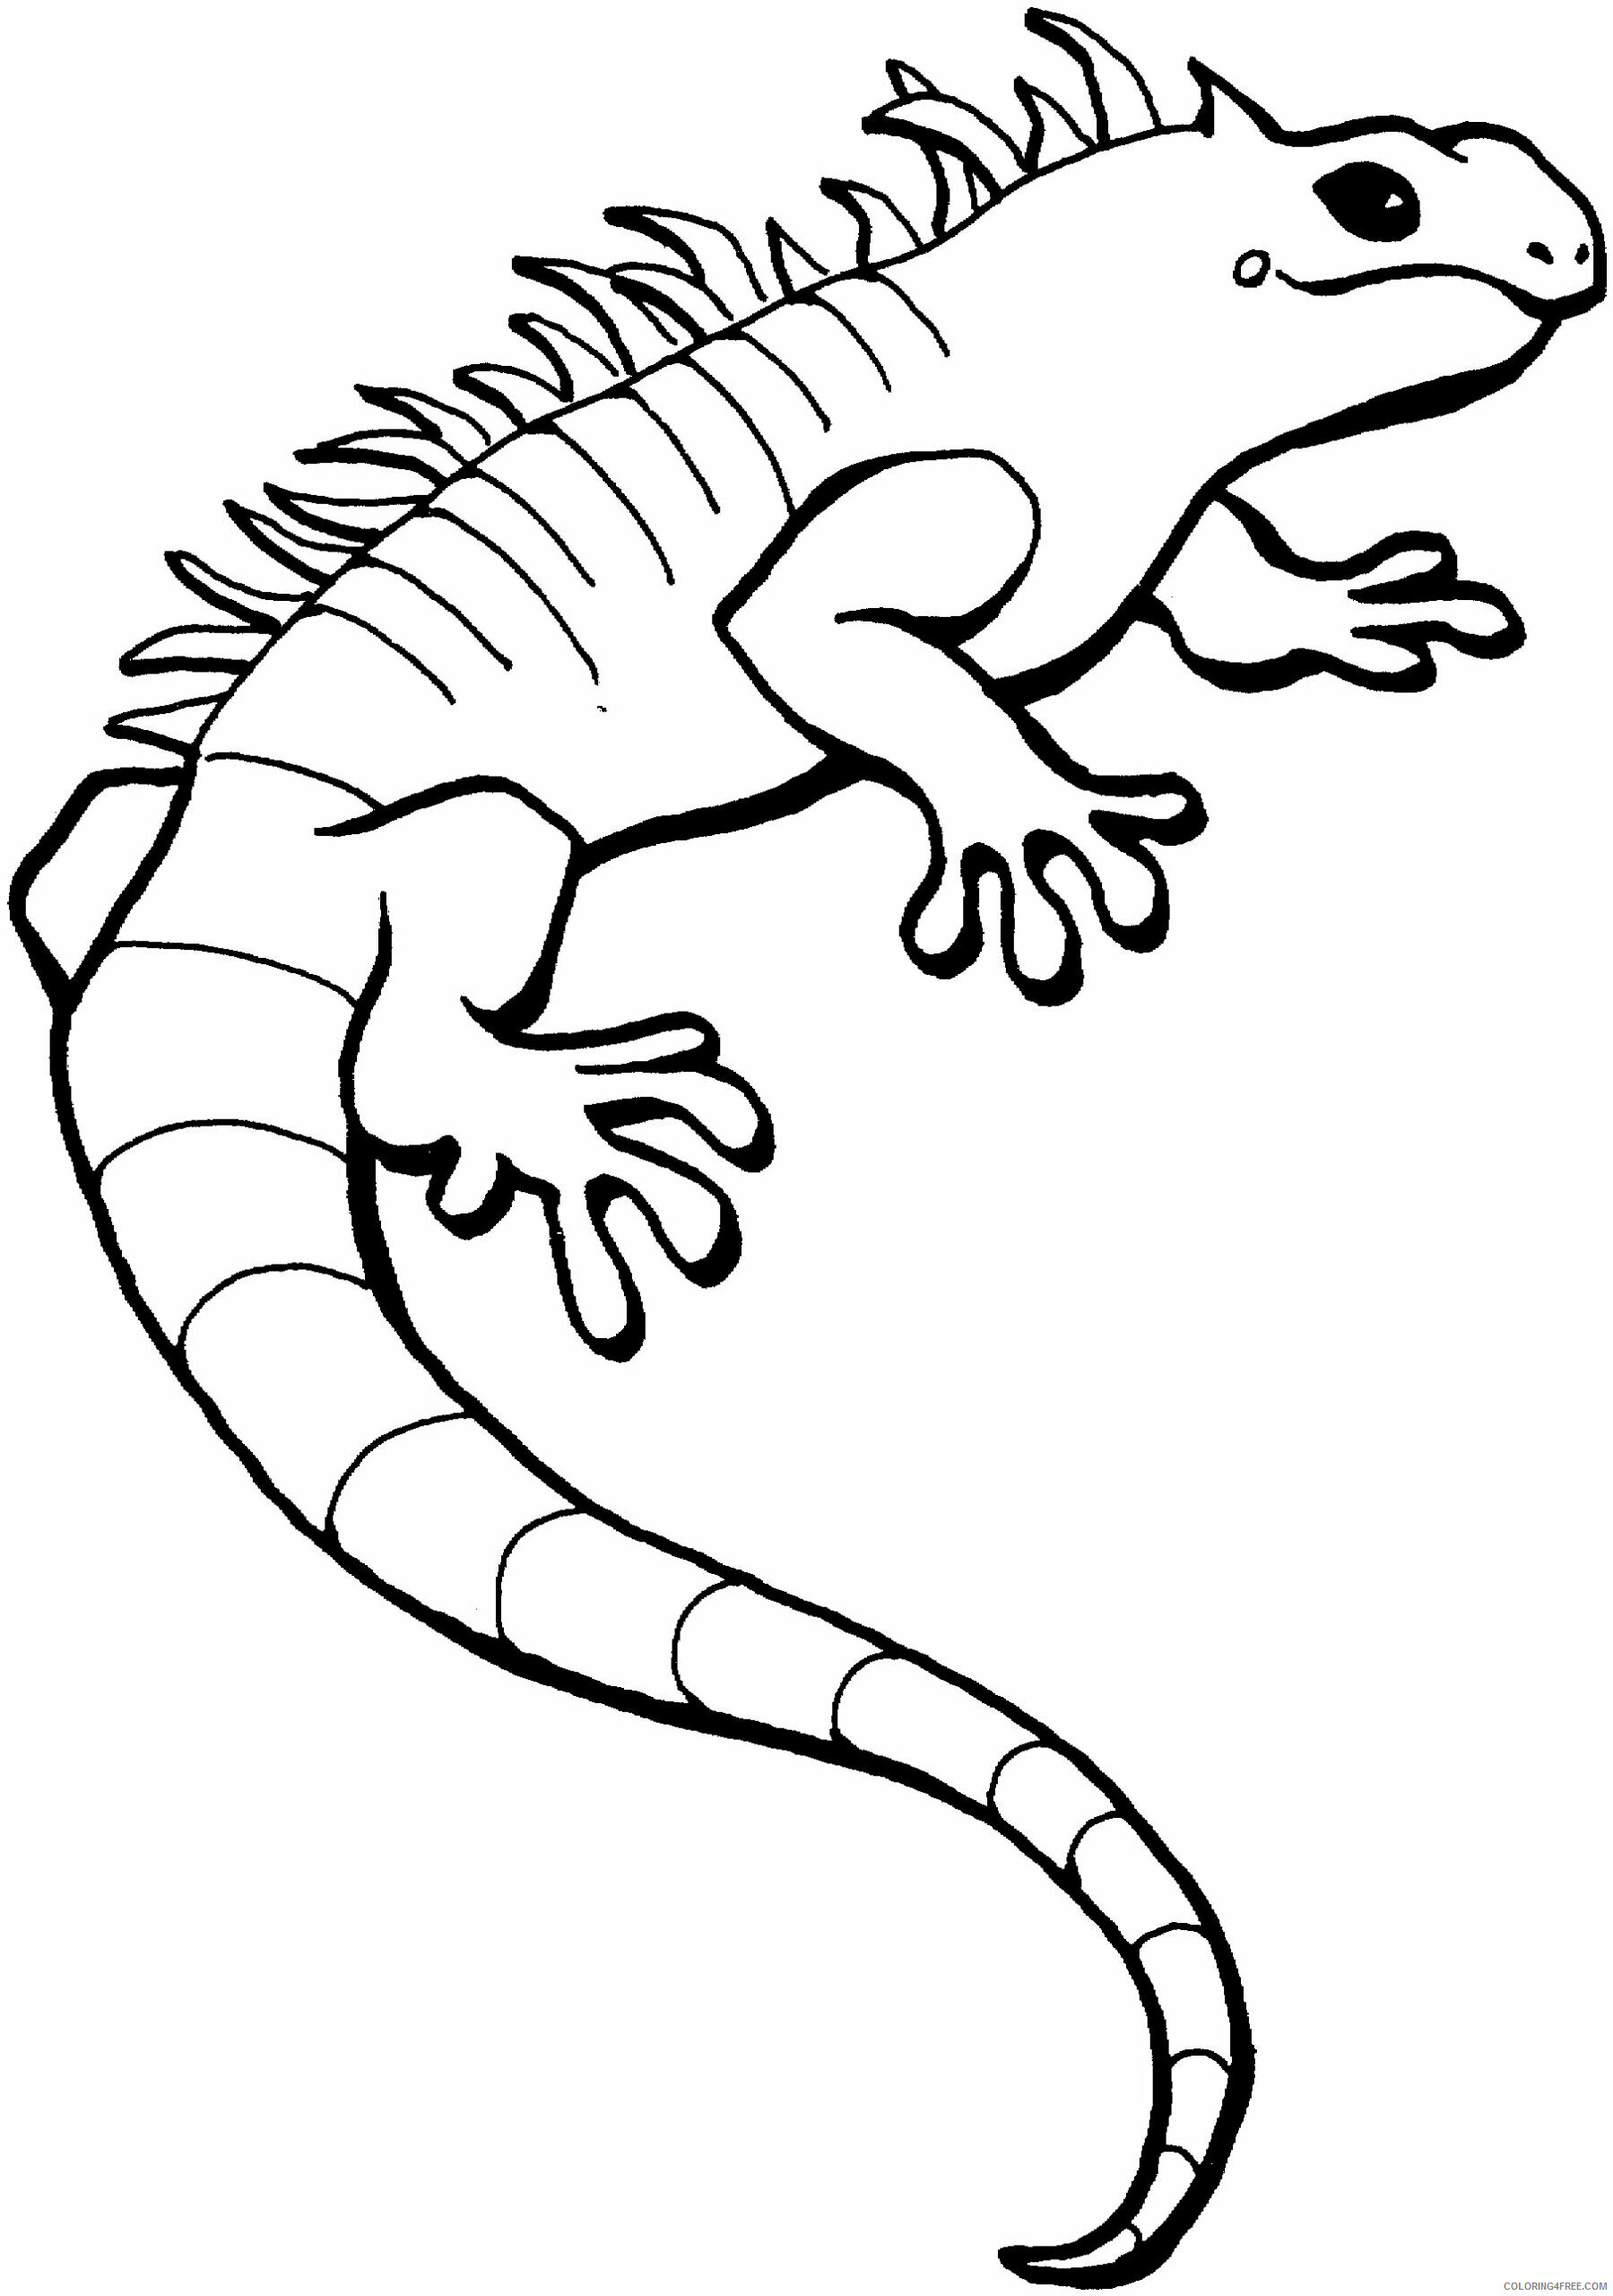 Lizard Coloring Sheets Animal Coloring Pages Printable 2021 2864 Coloring4free